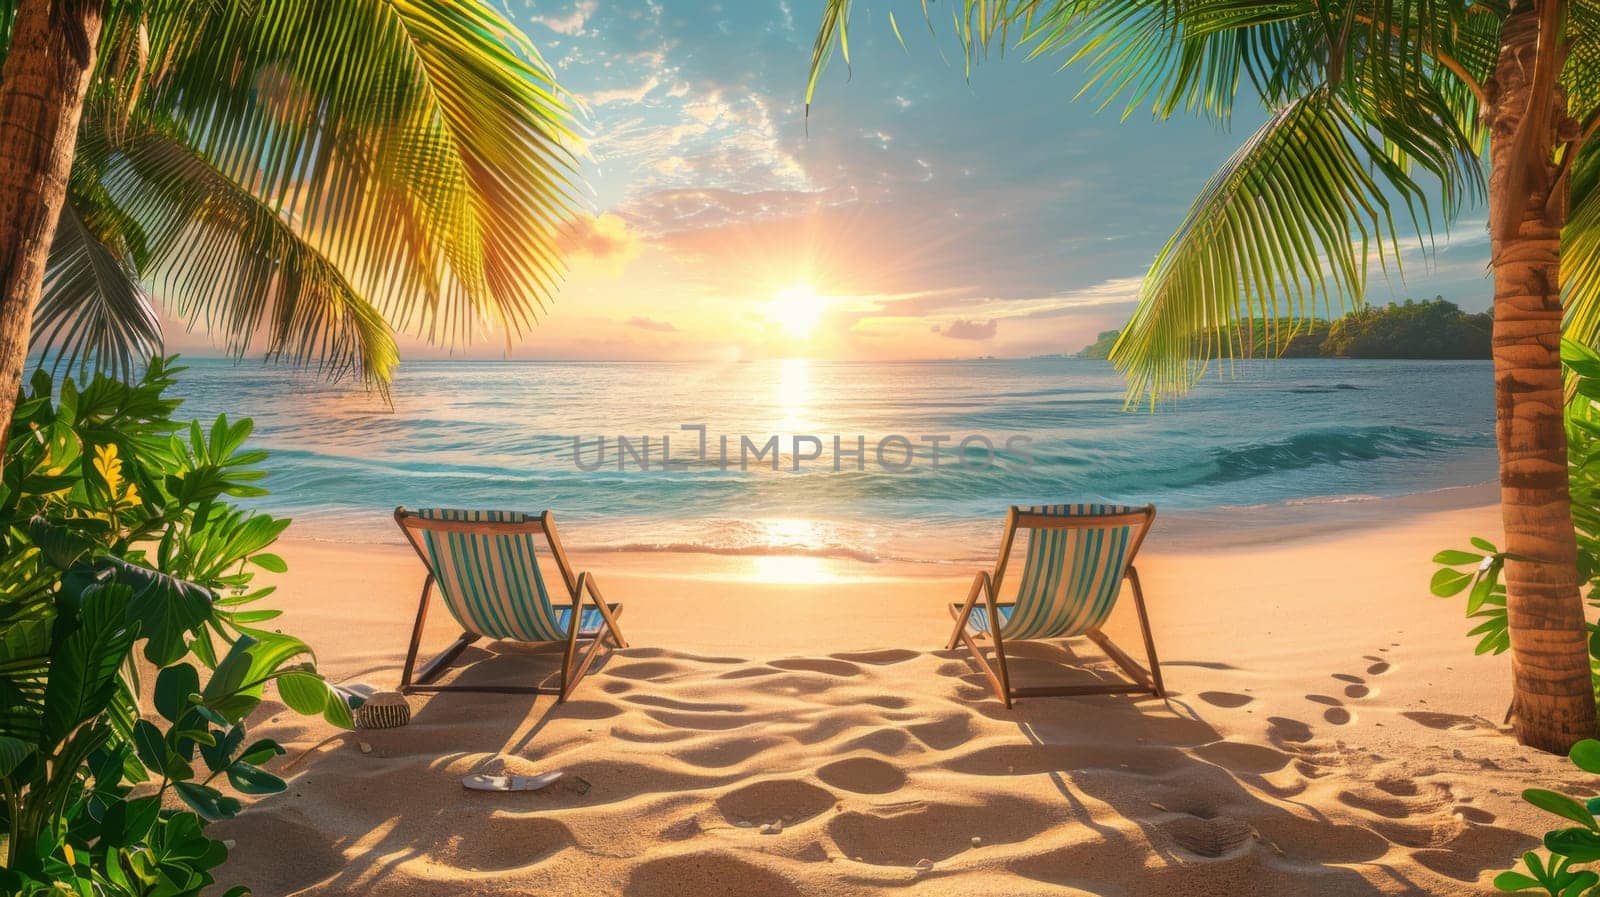 Two chairs on the beach at sunset with palm trees in background